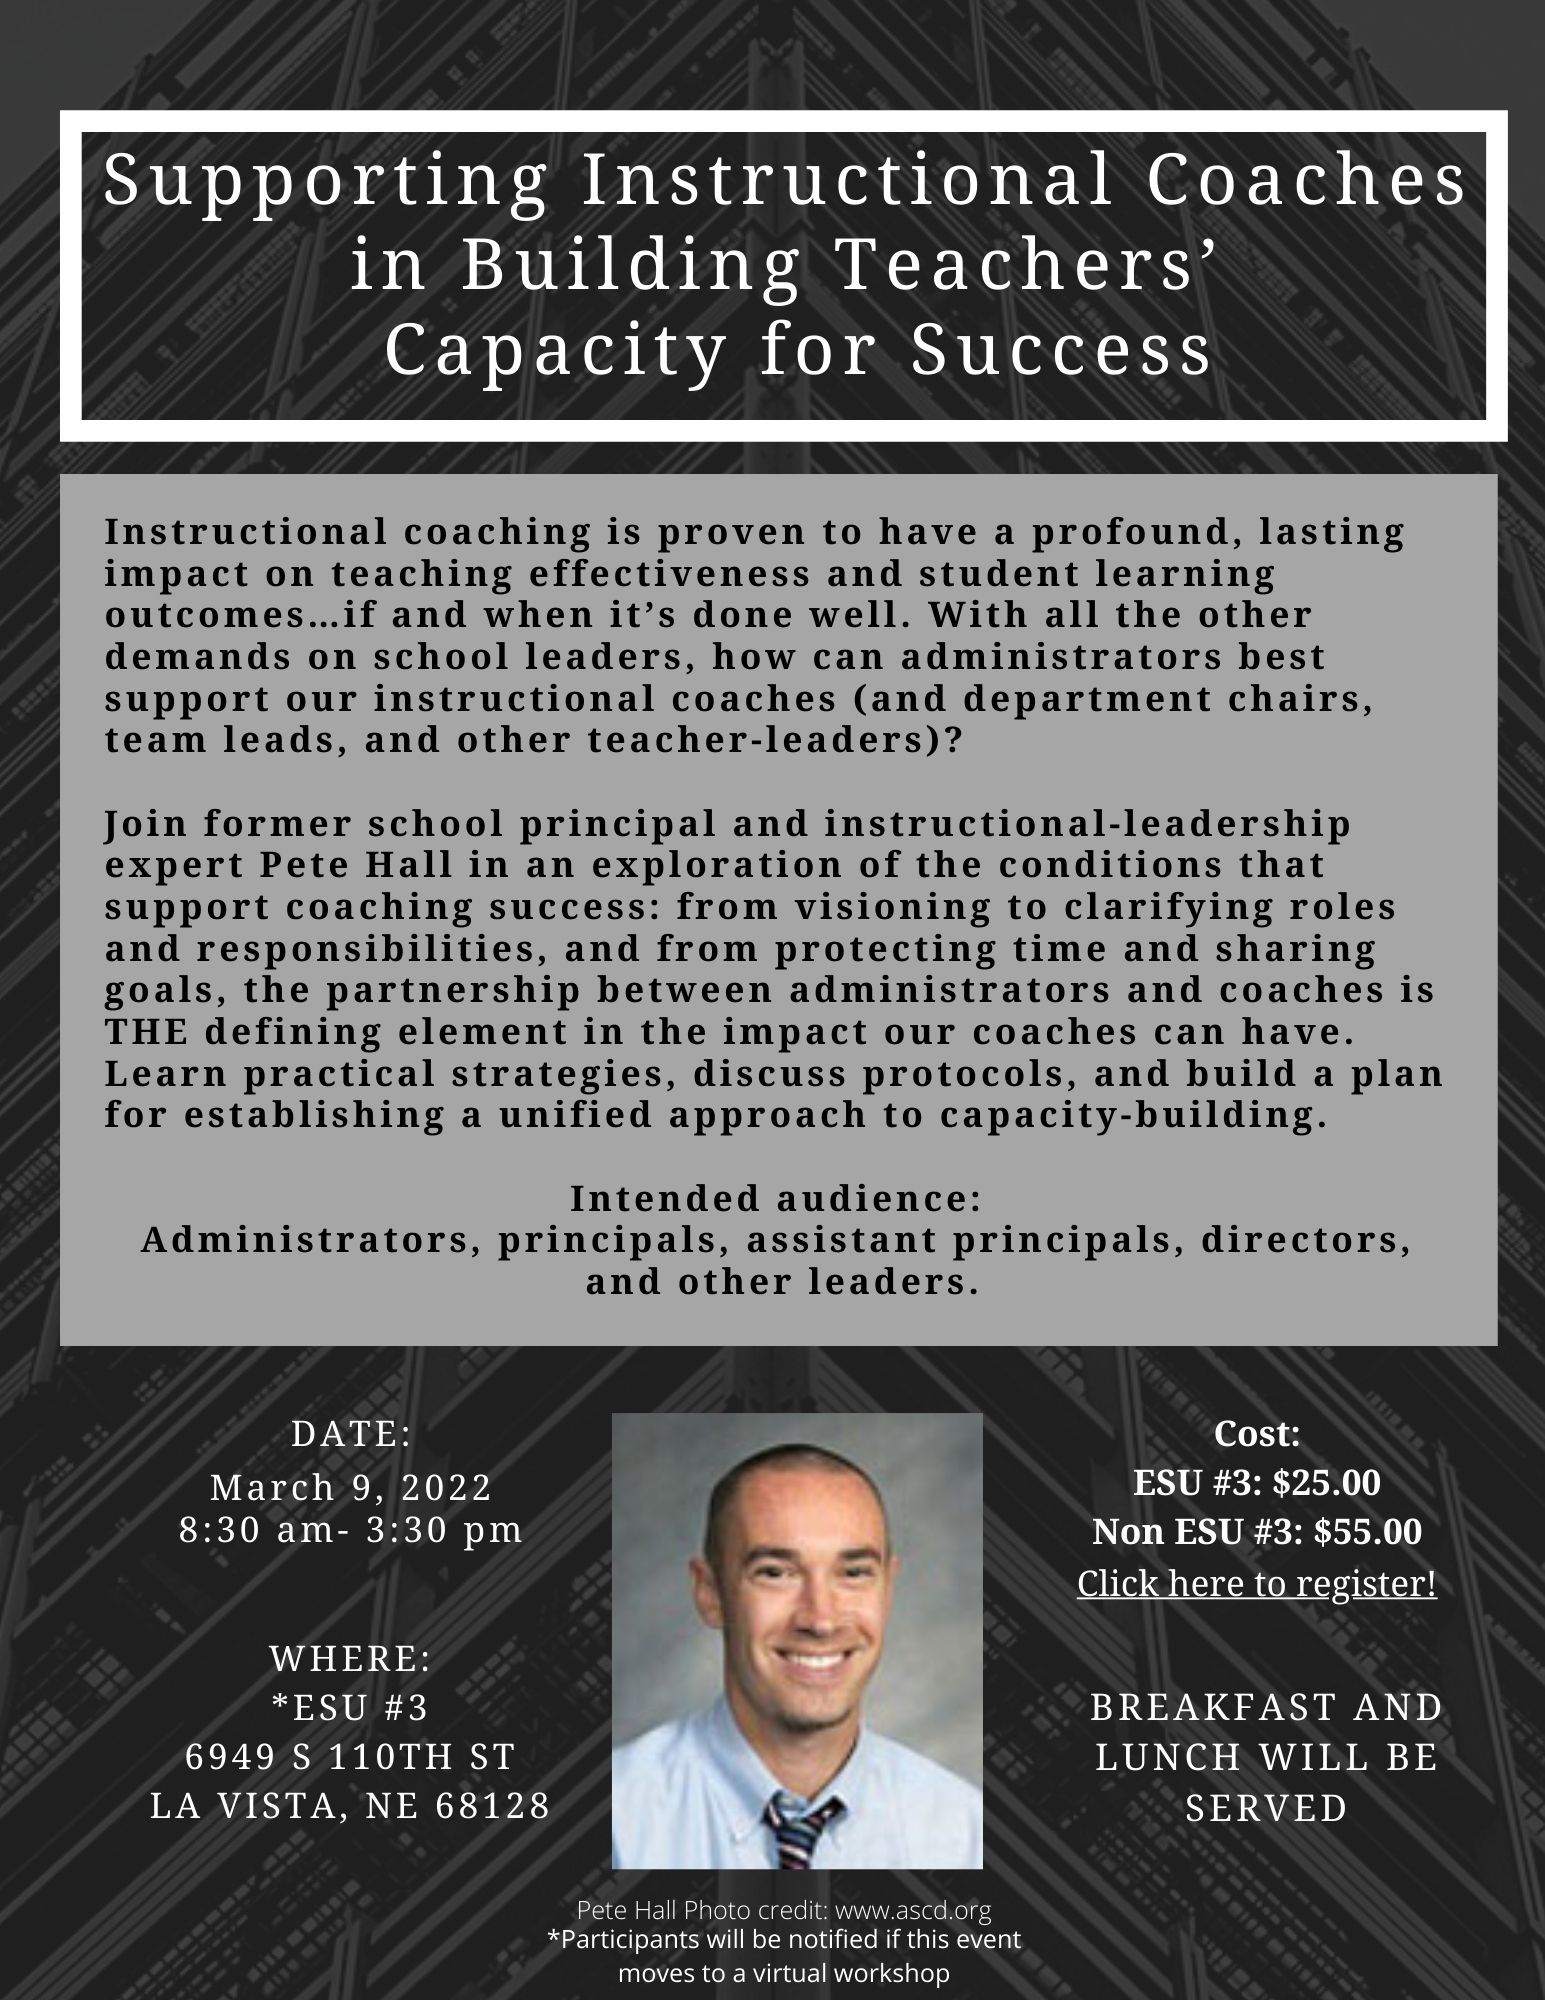 Click here to register for the Supporting Instructional Coaches in Building Teacher Capacity for Success #19995 on March 9, 2022